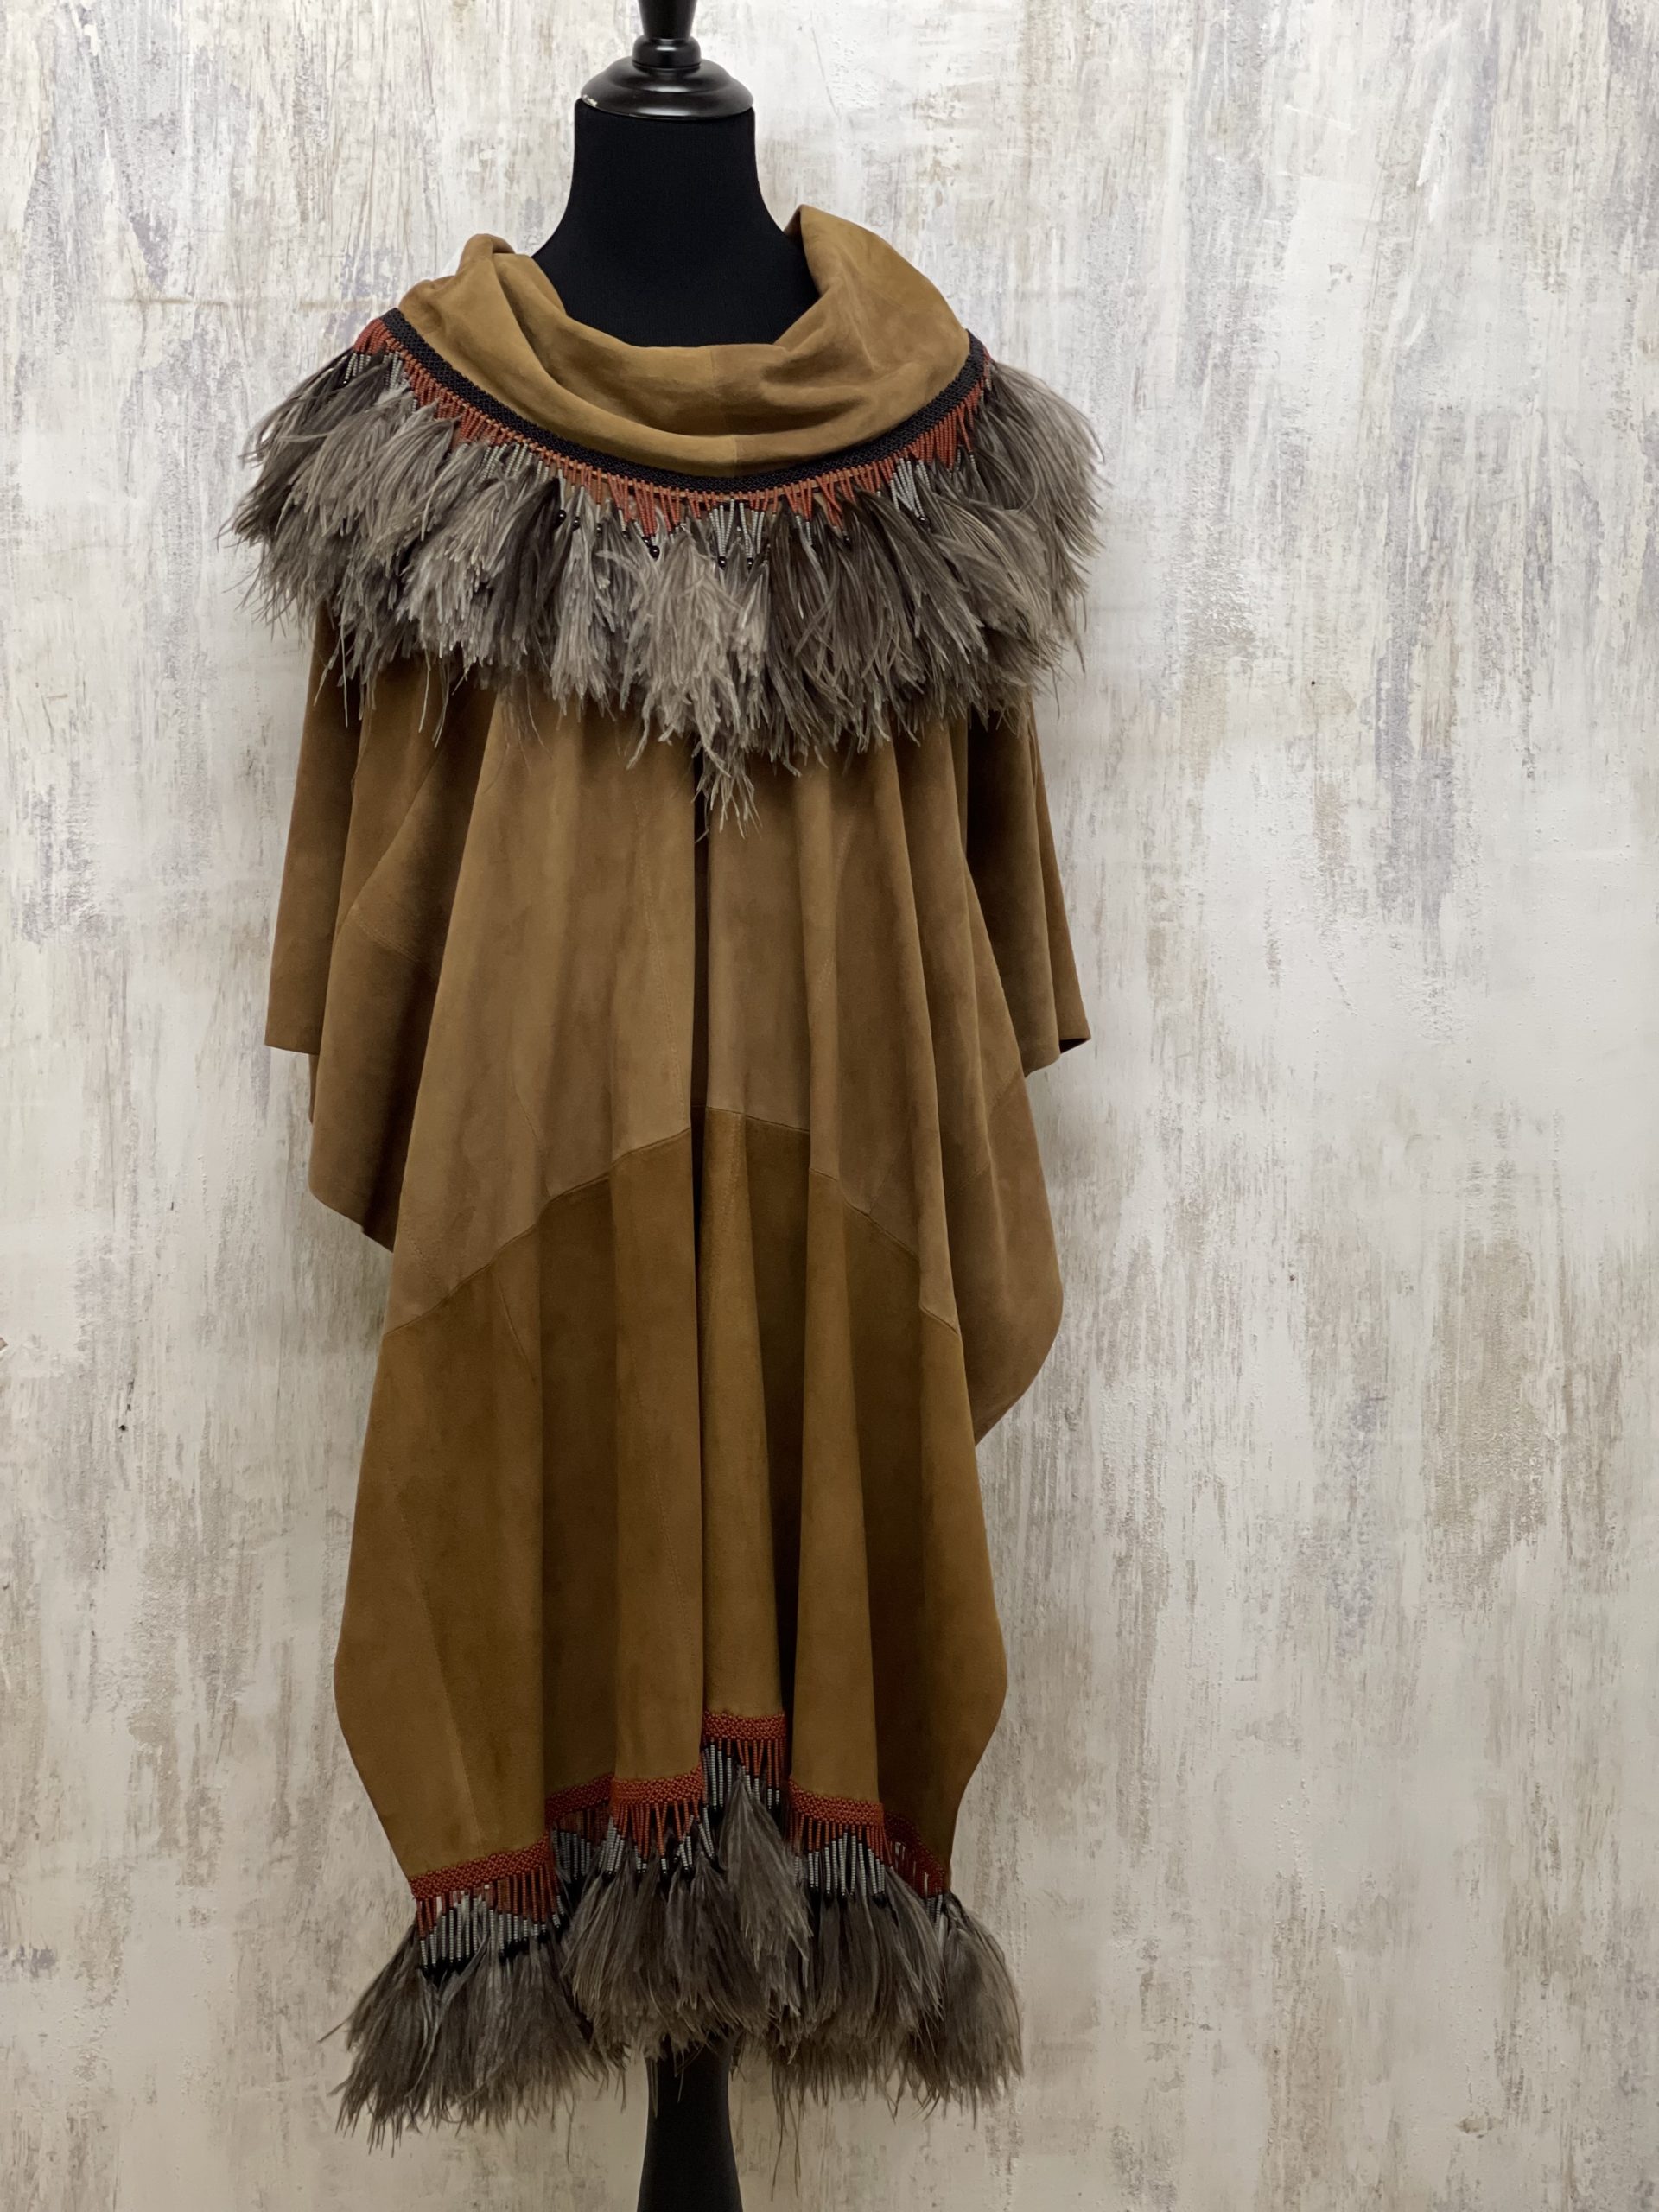 Gaucho style over head Poncho in Tobacco Suede